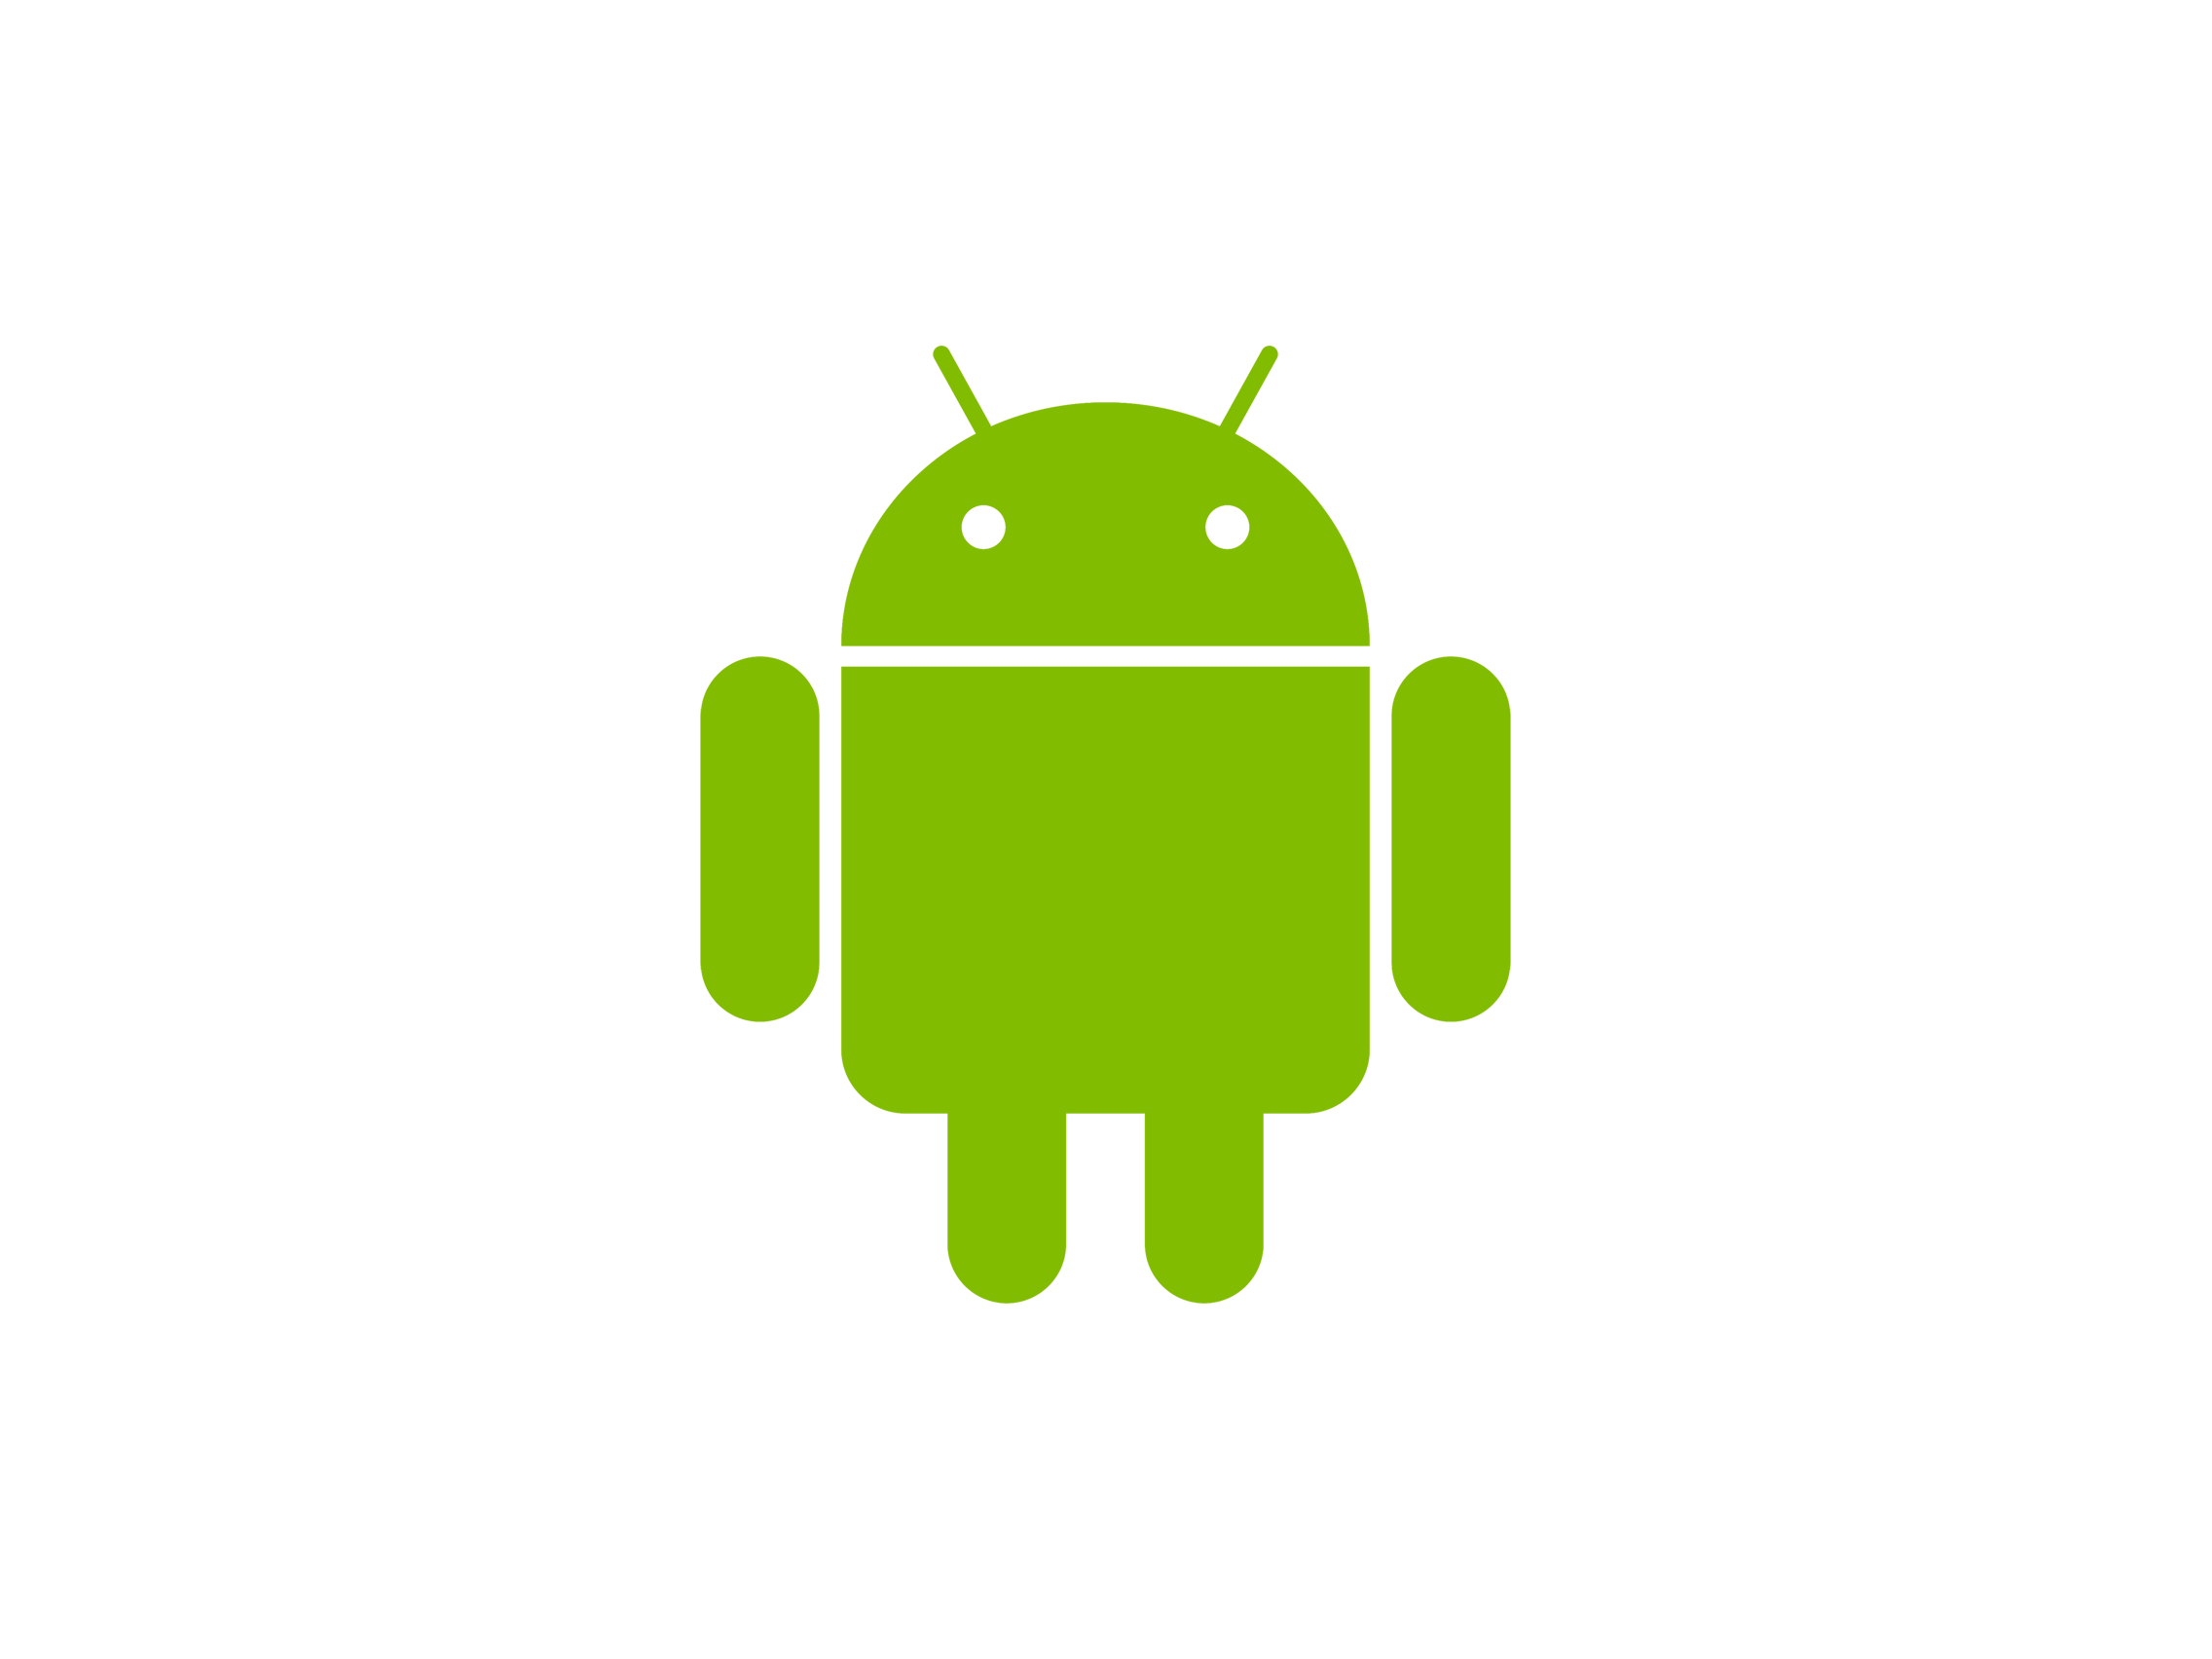 Other Android